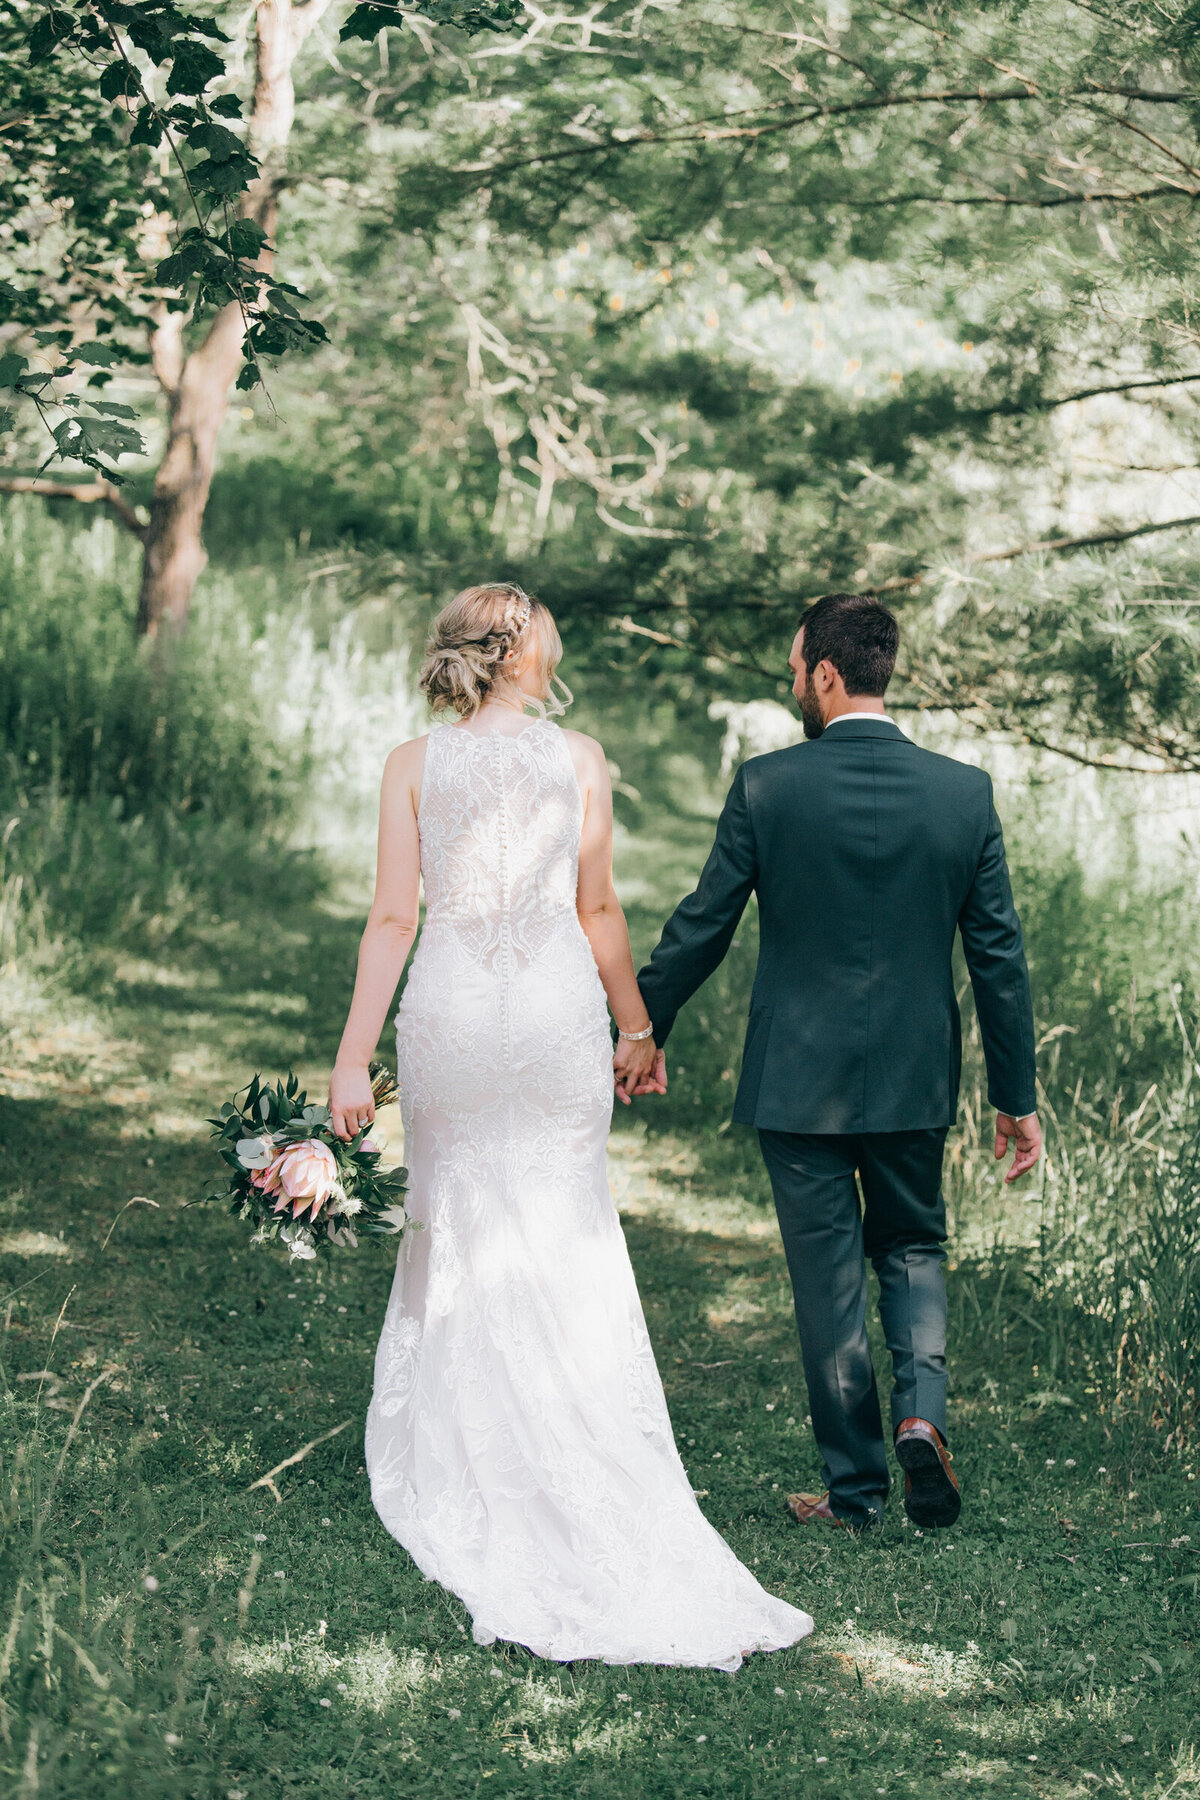 A bride wearing an elegant ivory wedding dress with a beautiful lace back walking hand in hand with her groom wearing a casual green suit